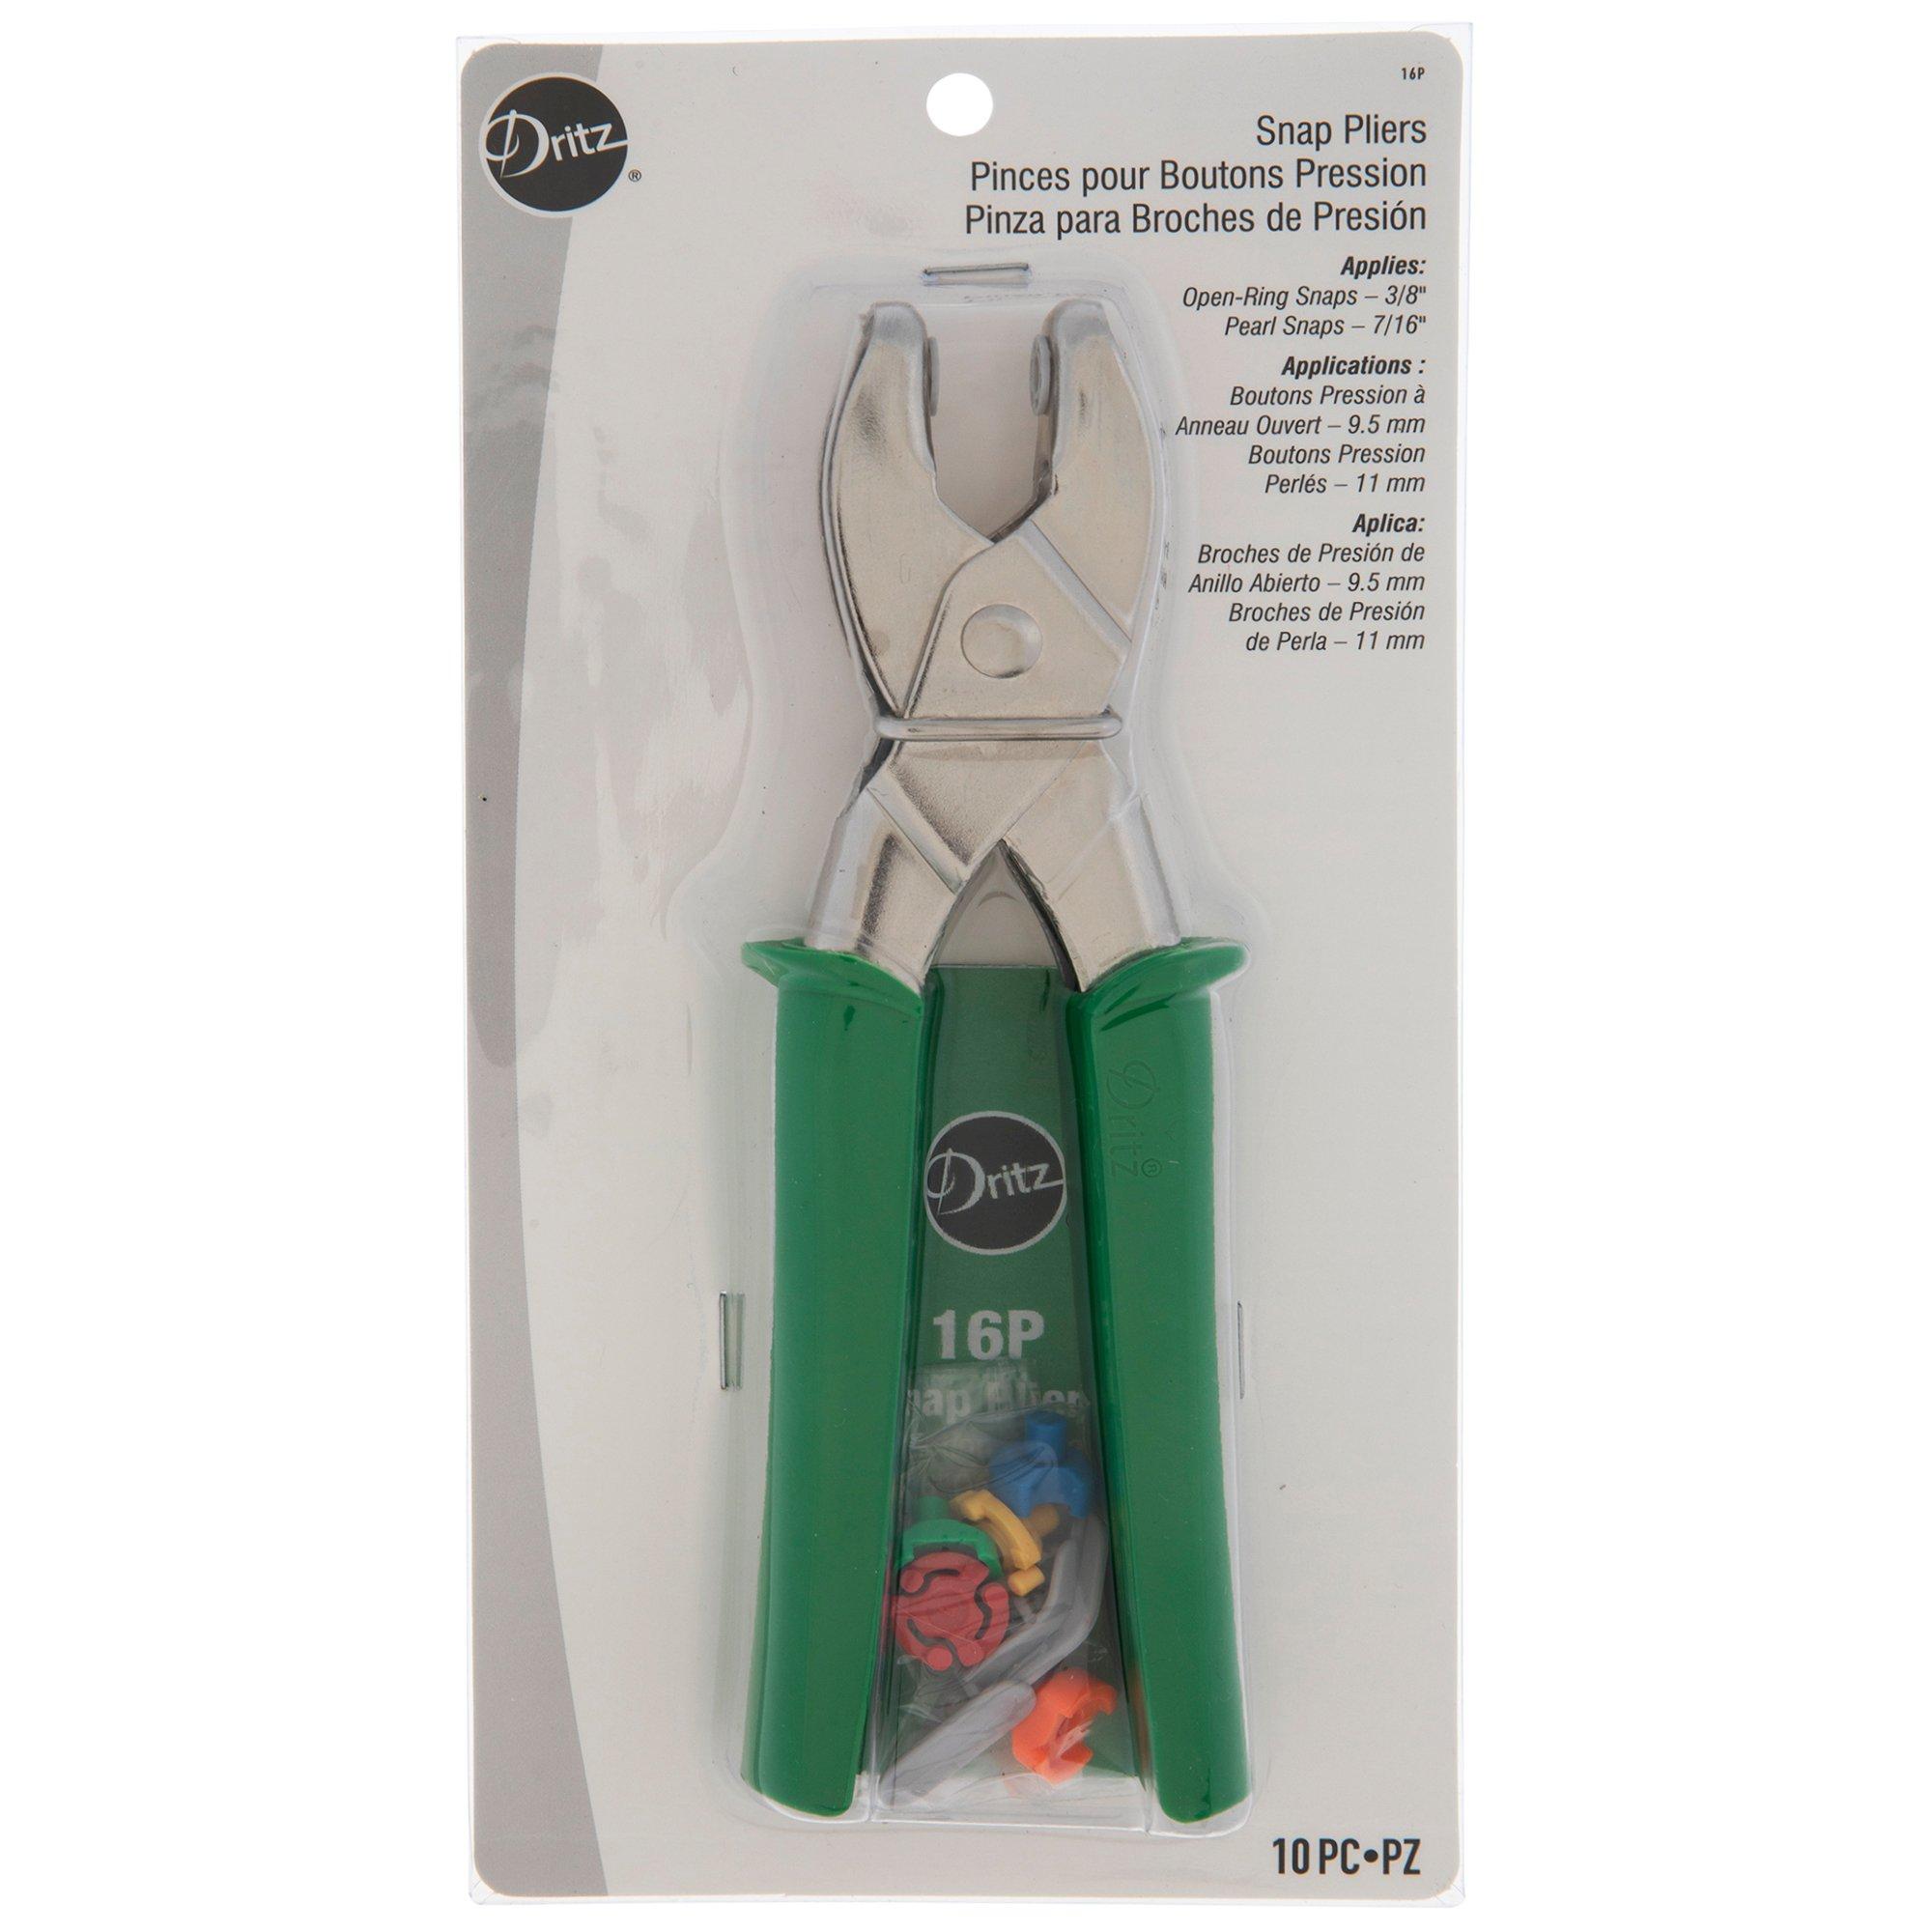 How to use Dritz Heavy Duty Snap Pliers 